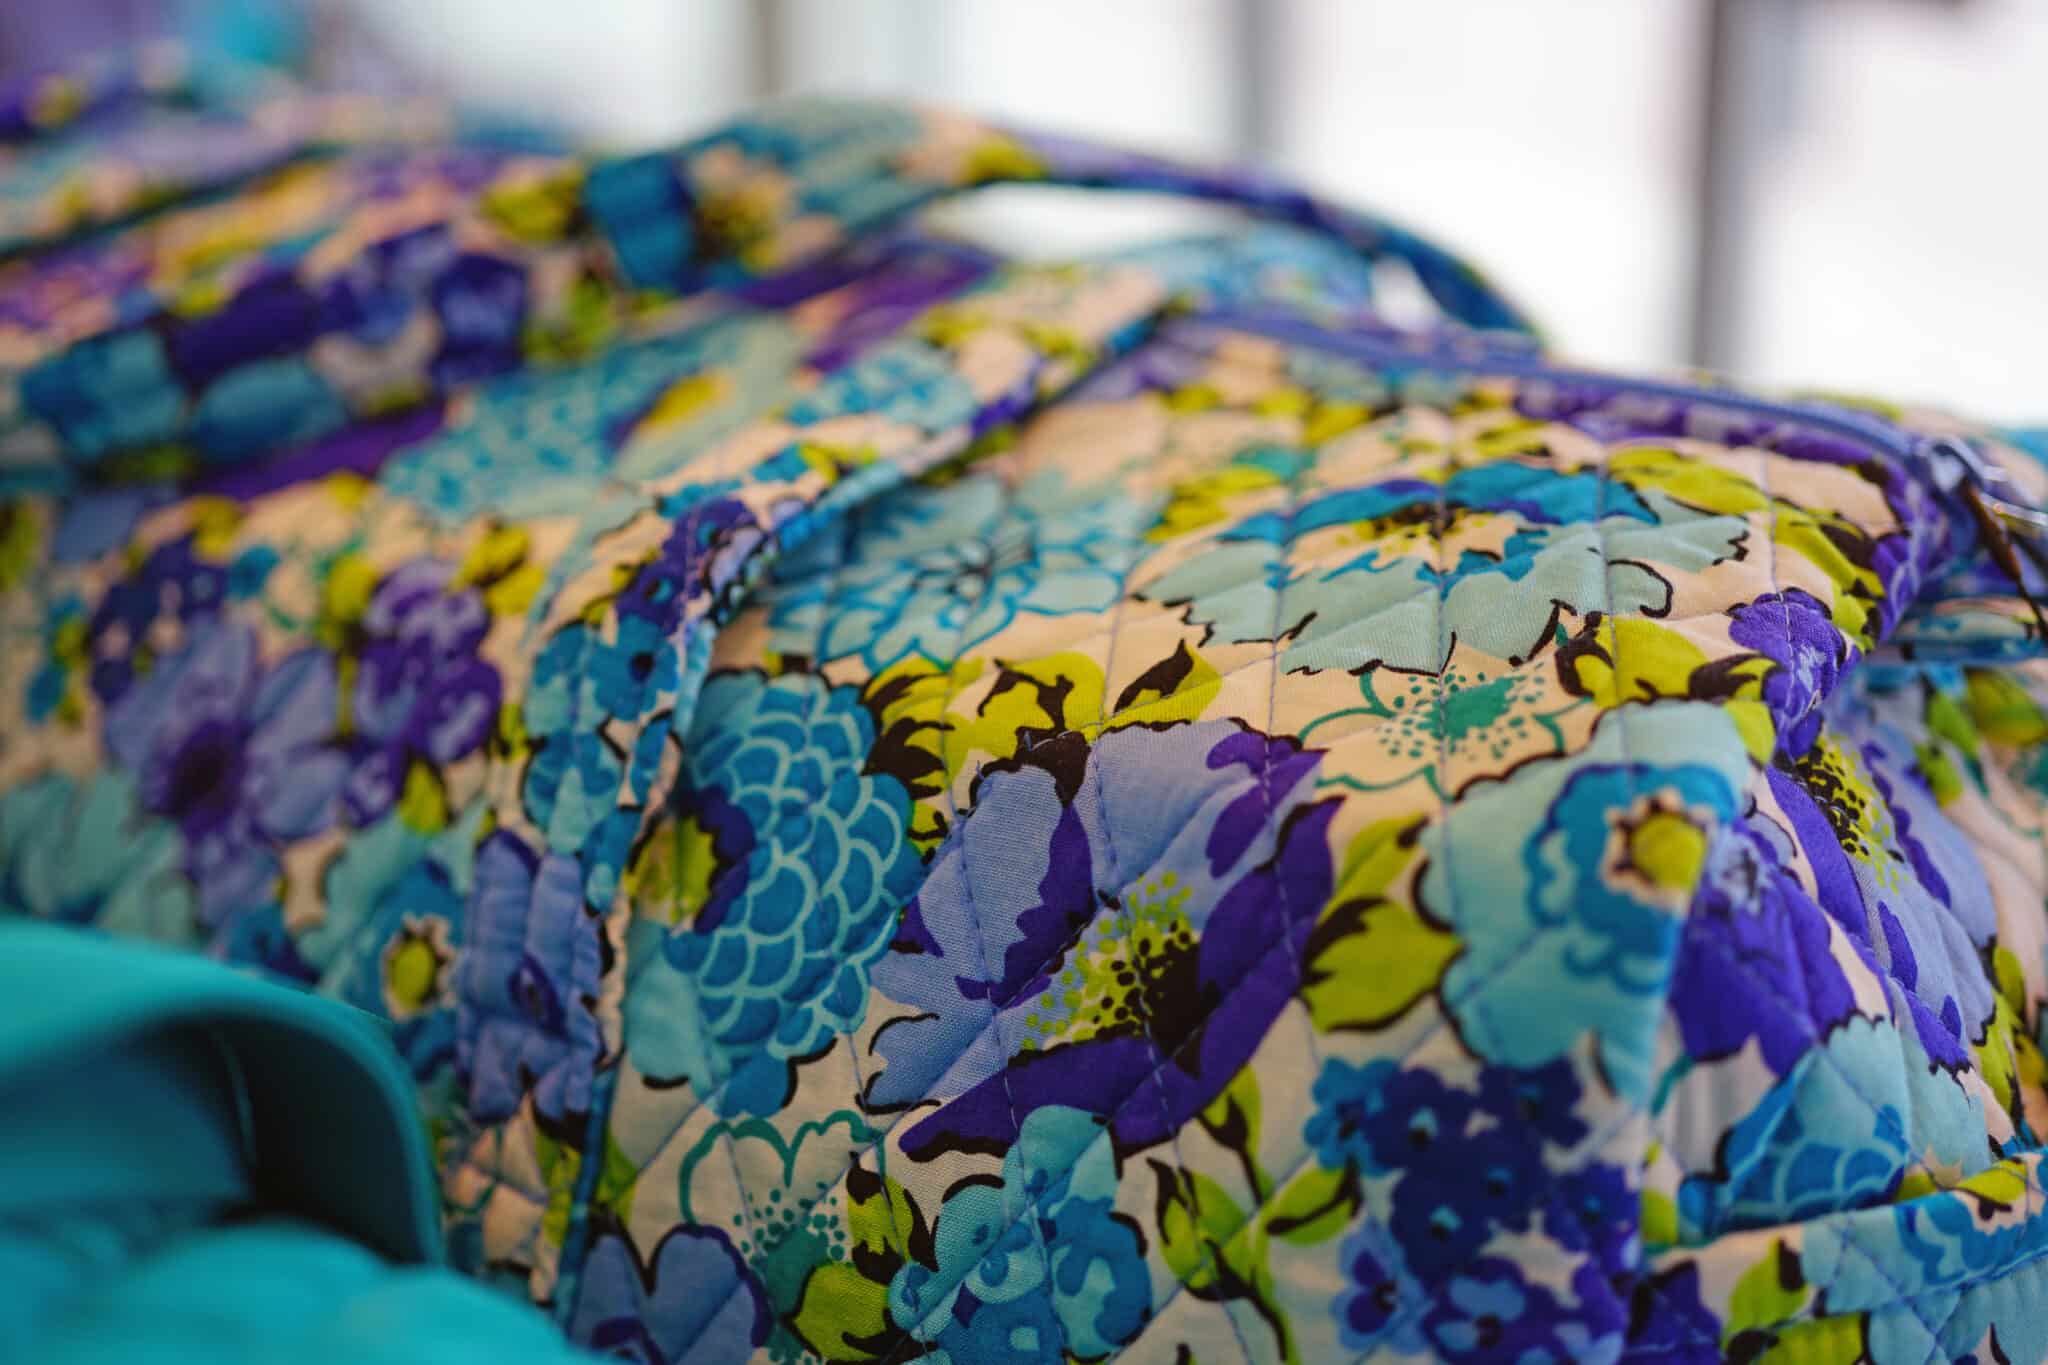 A close-up view of a fabric with a vibrant floral pattern in shades of blue, purple, and green. The print features large flowers on a textured surface, suggesting the item could be an iconic Vera Bradley bag or piece of clothing. Bright lighting enhances the vivid colors.